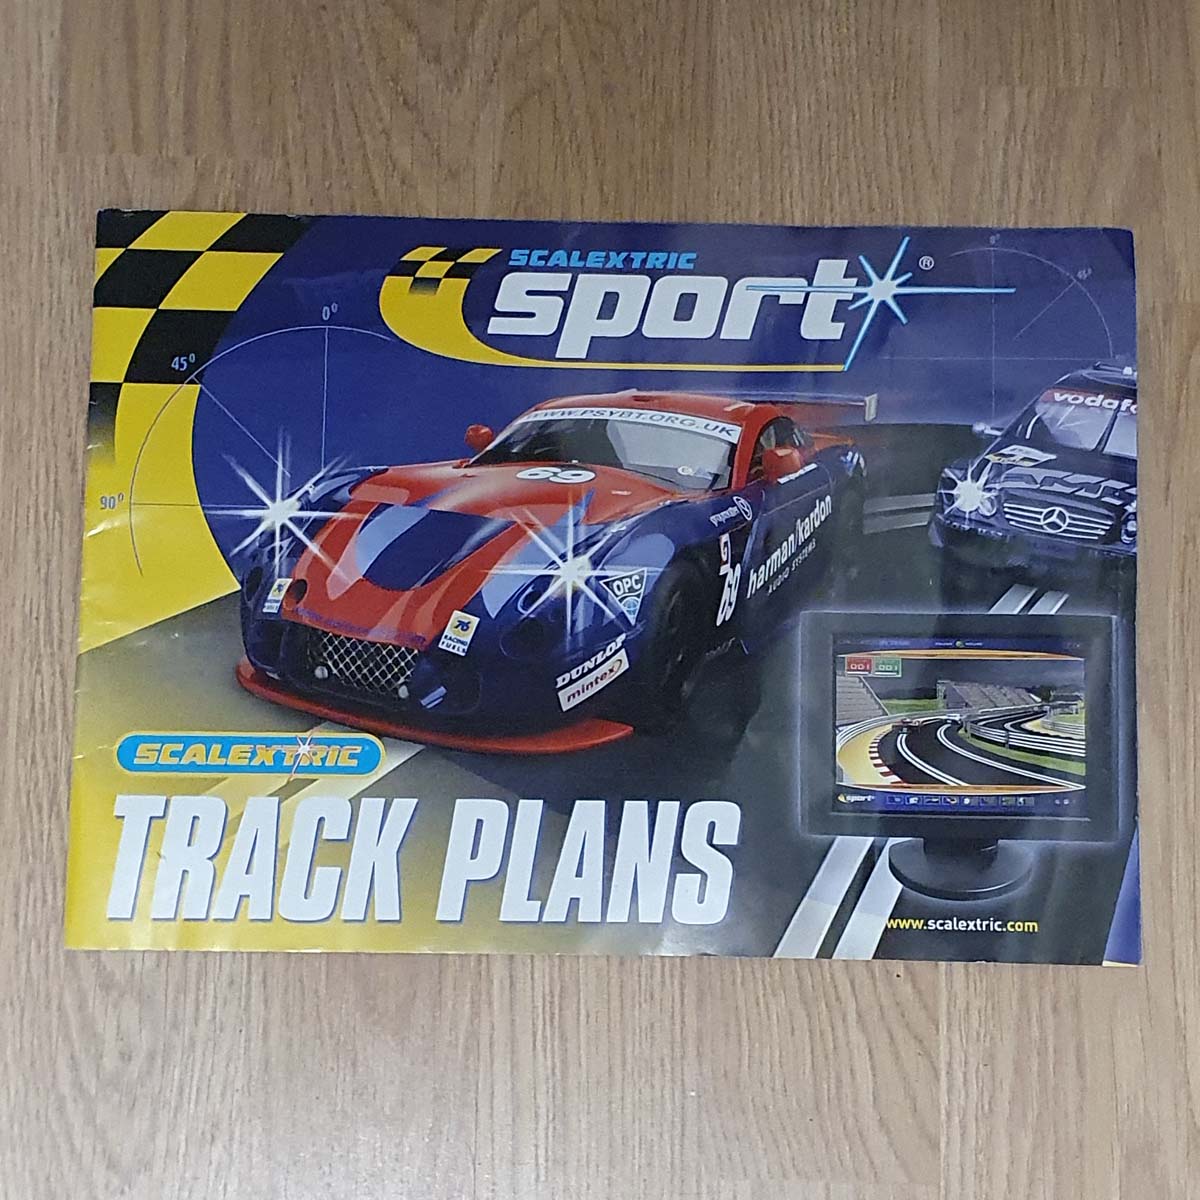 Scalextric C8163 Sport Track Plans Book - 26 Circuits - A4 Size